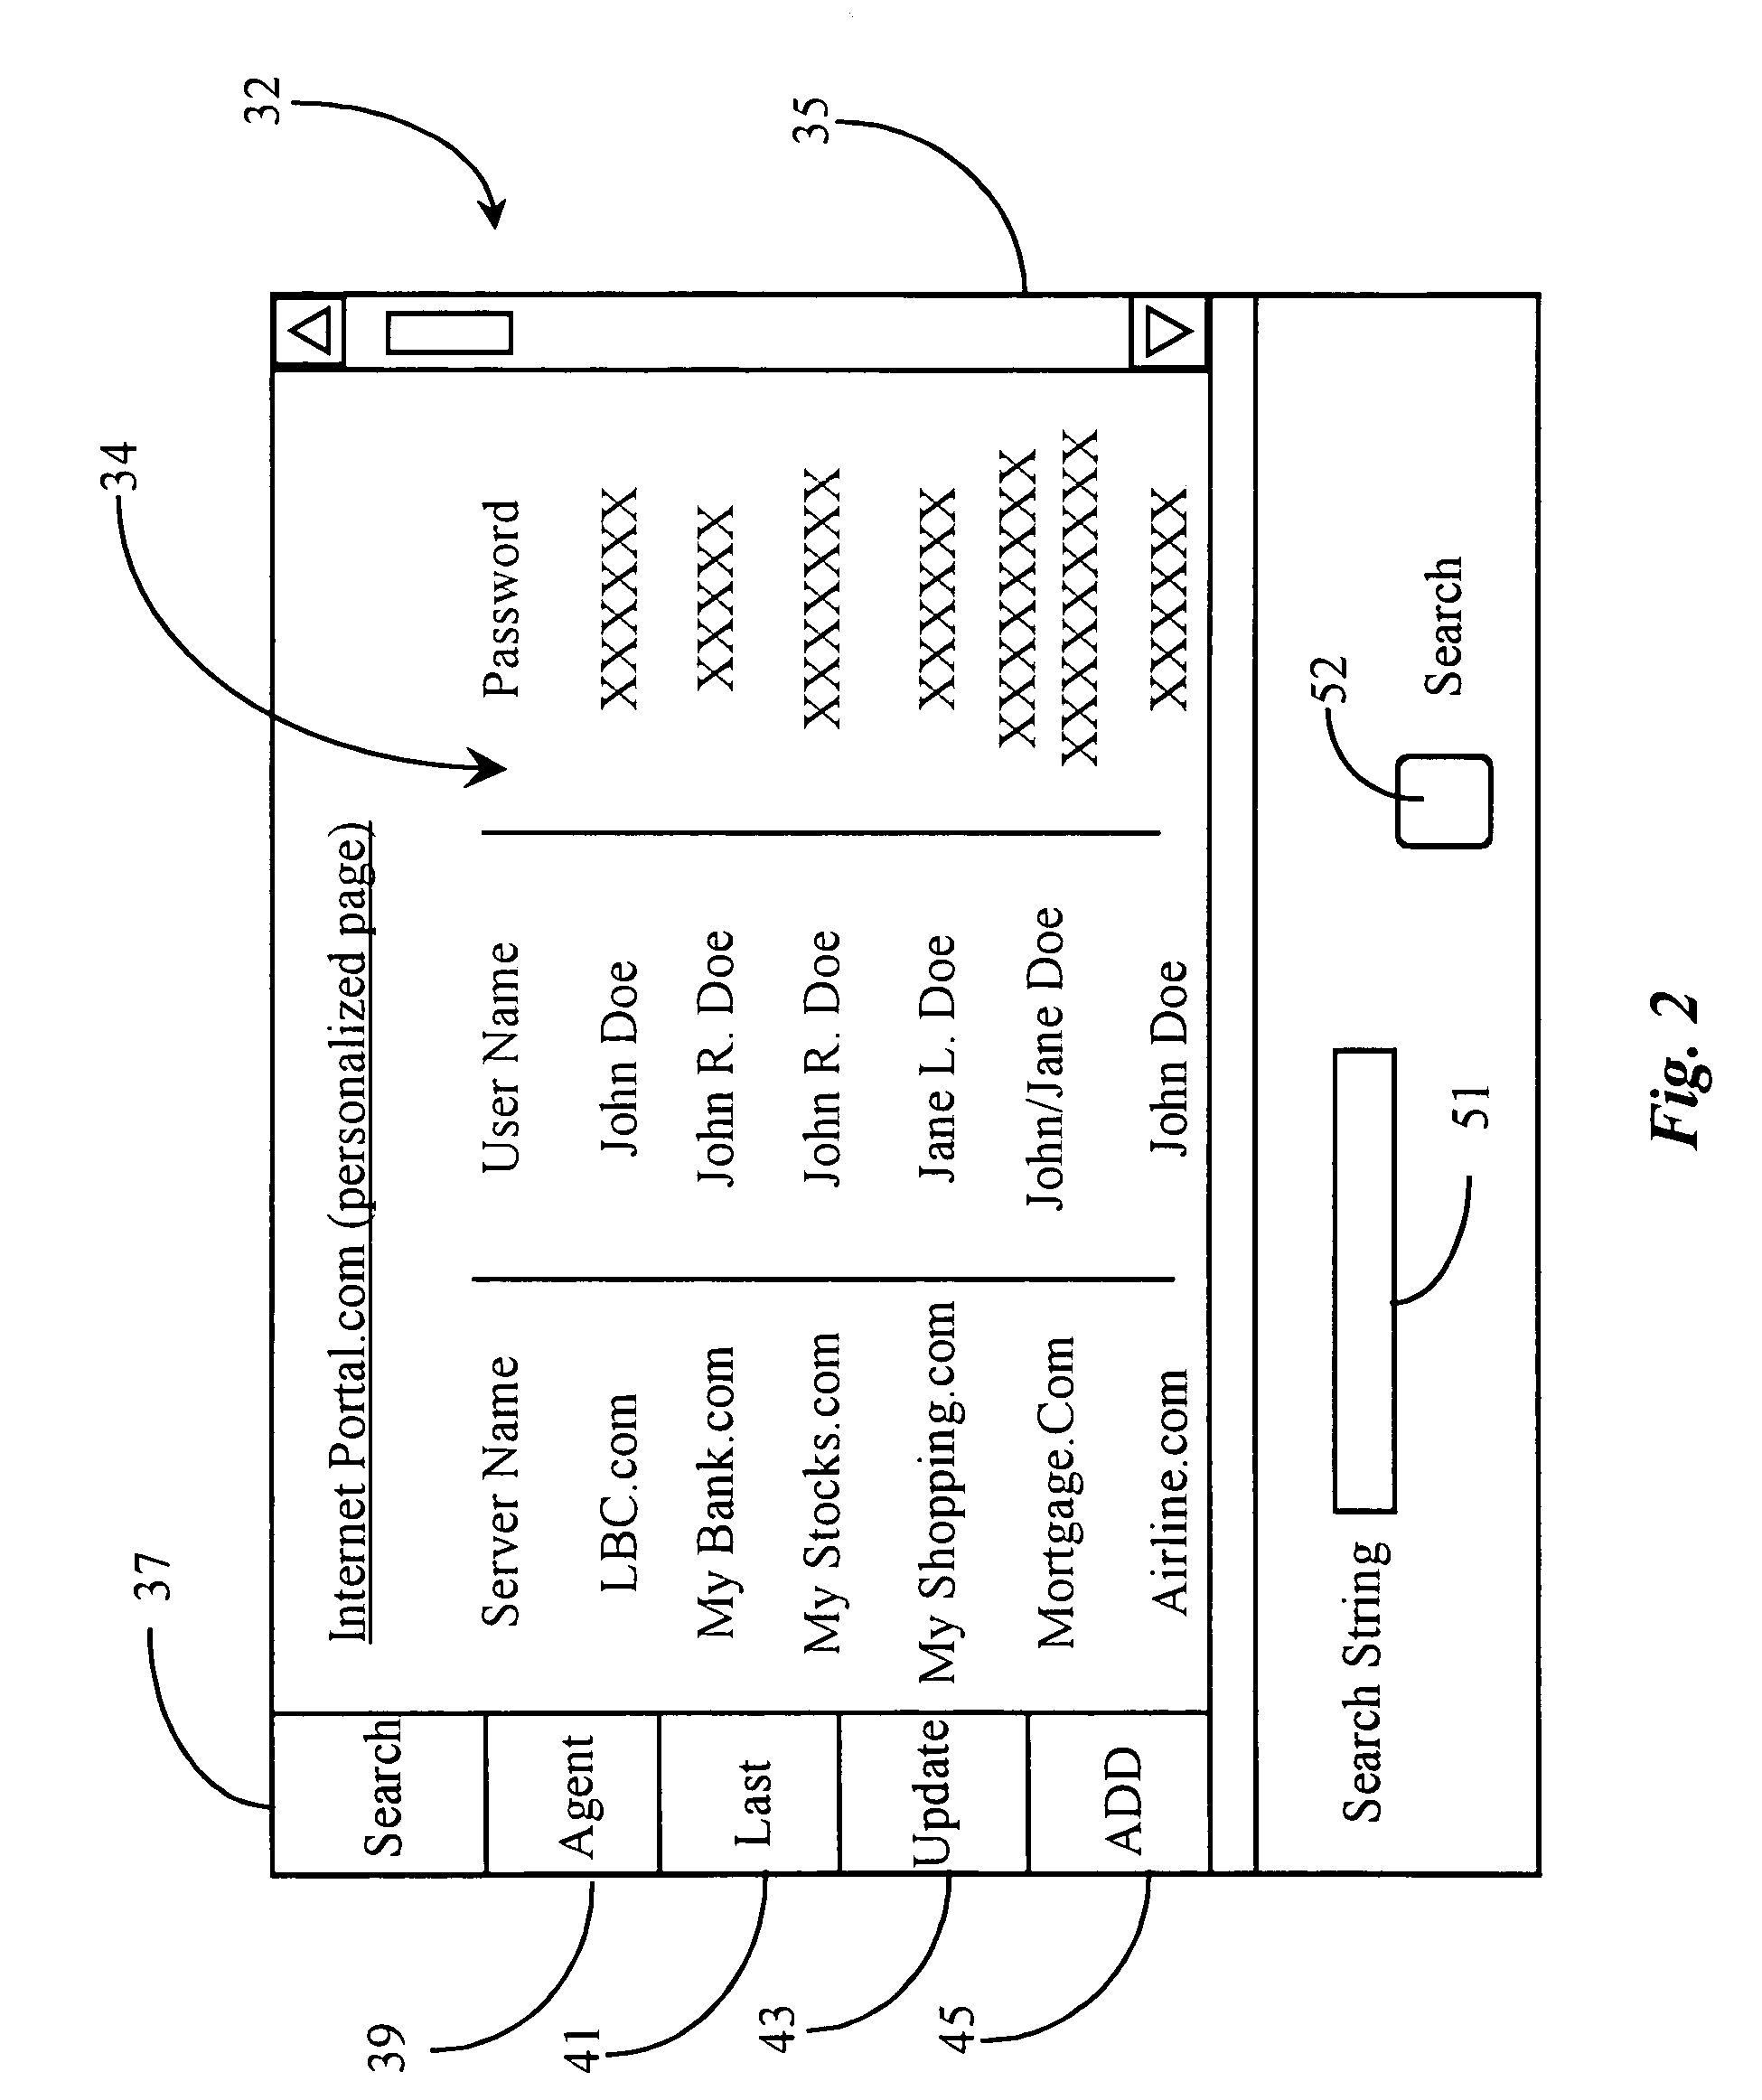 Interactive activity interface for managing personal data and performing transactions over a data packet network